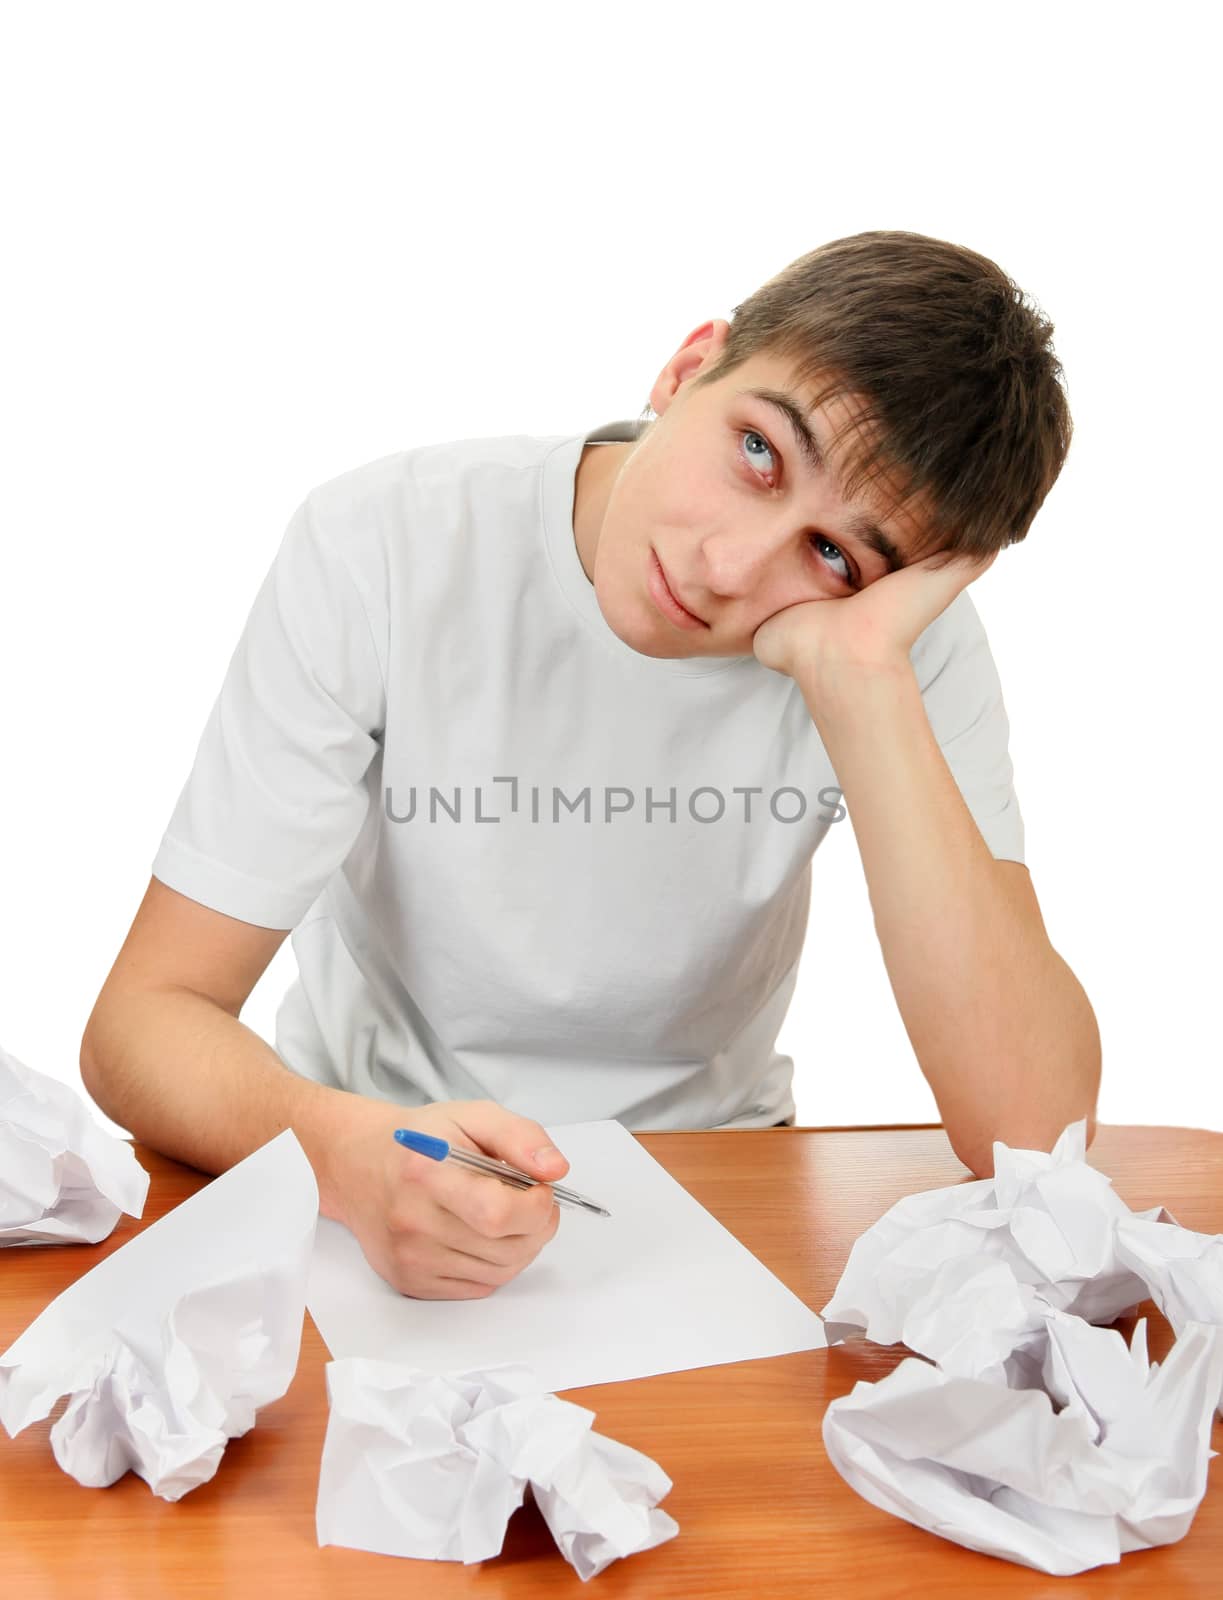 Teenager compose a Letter on the White Background